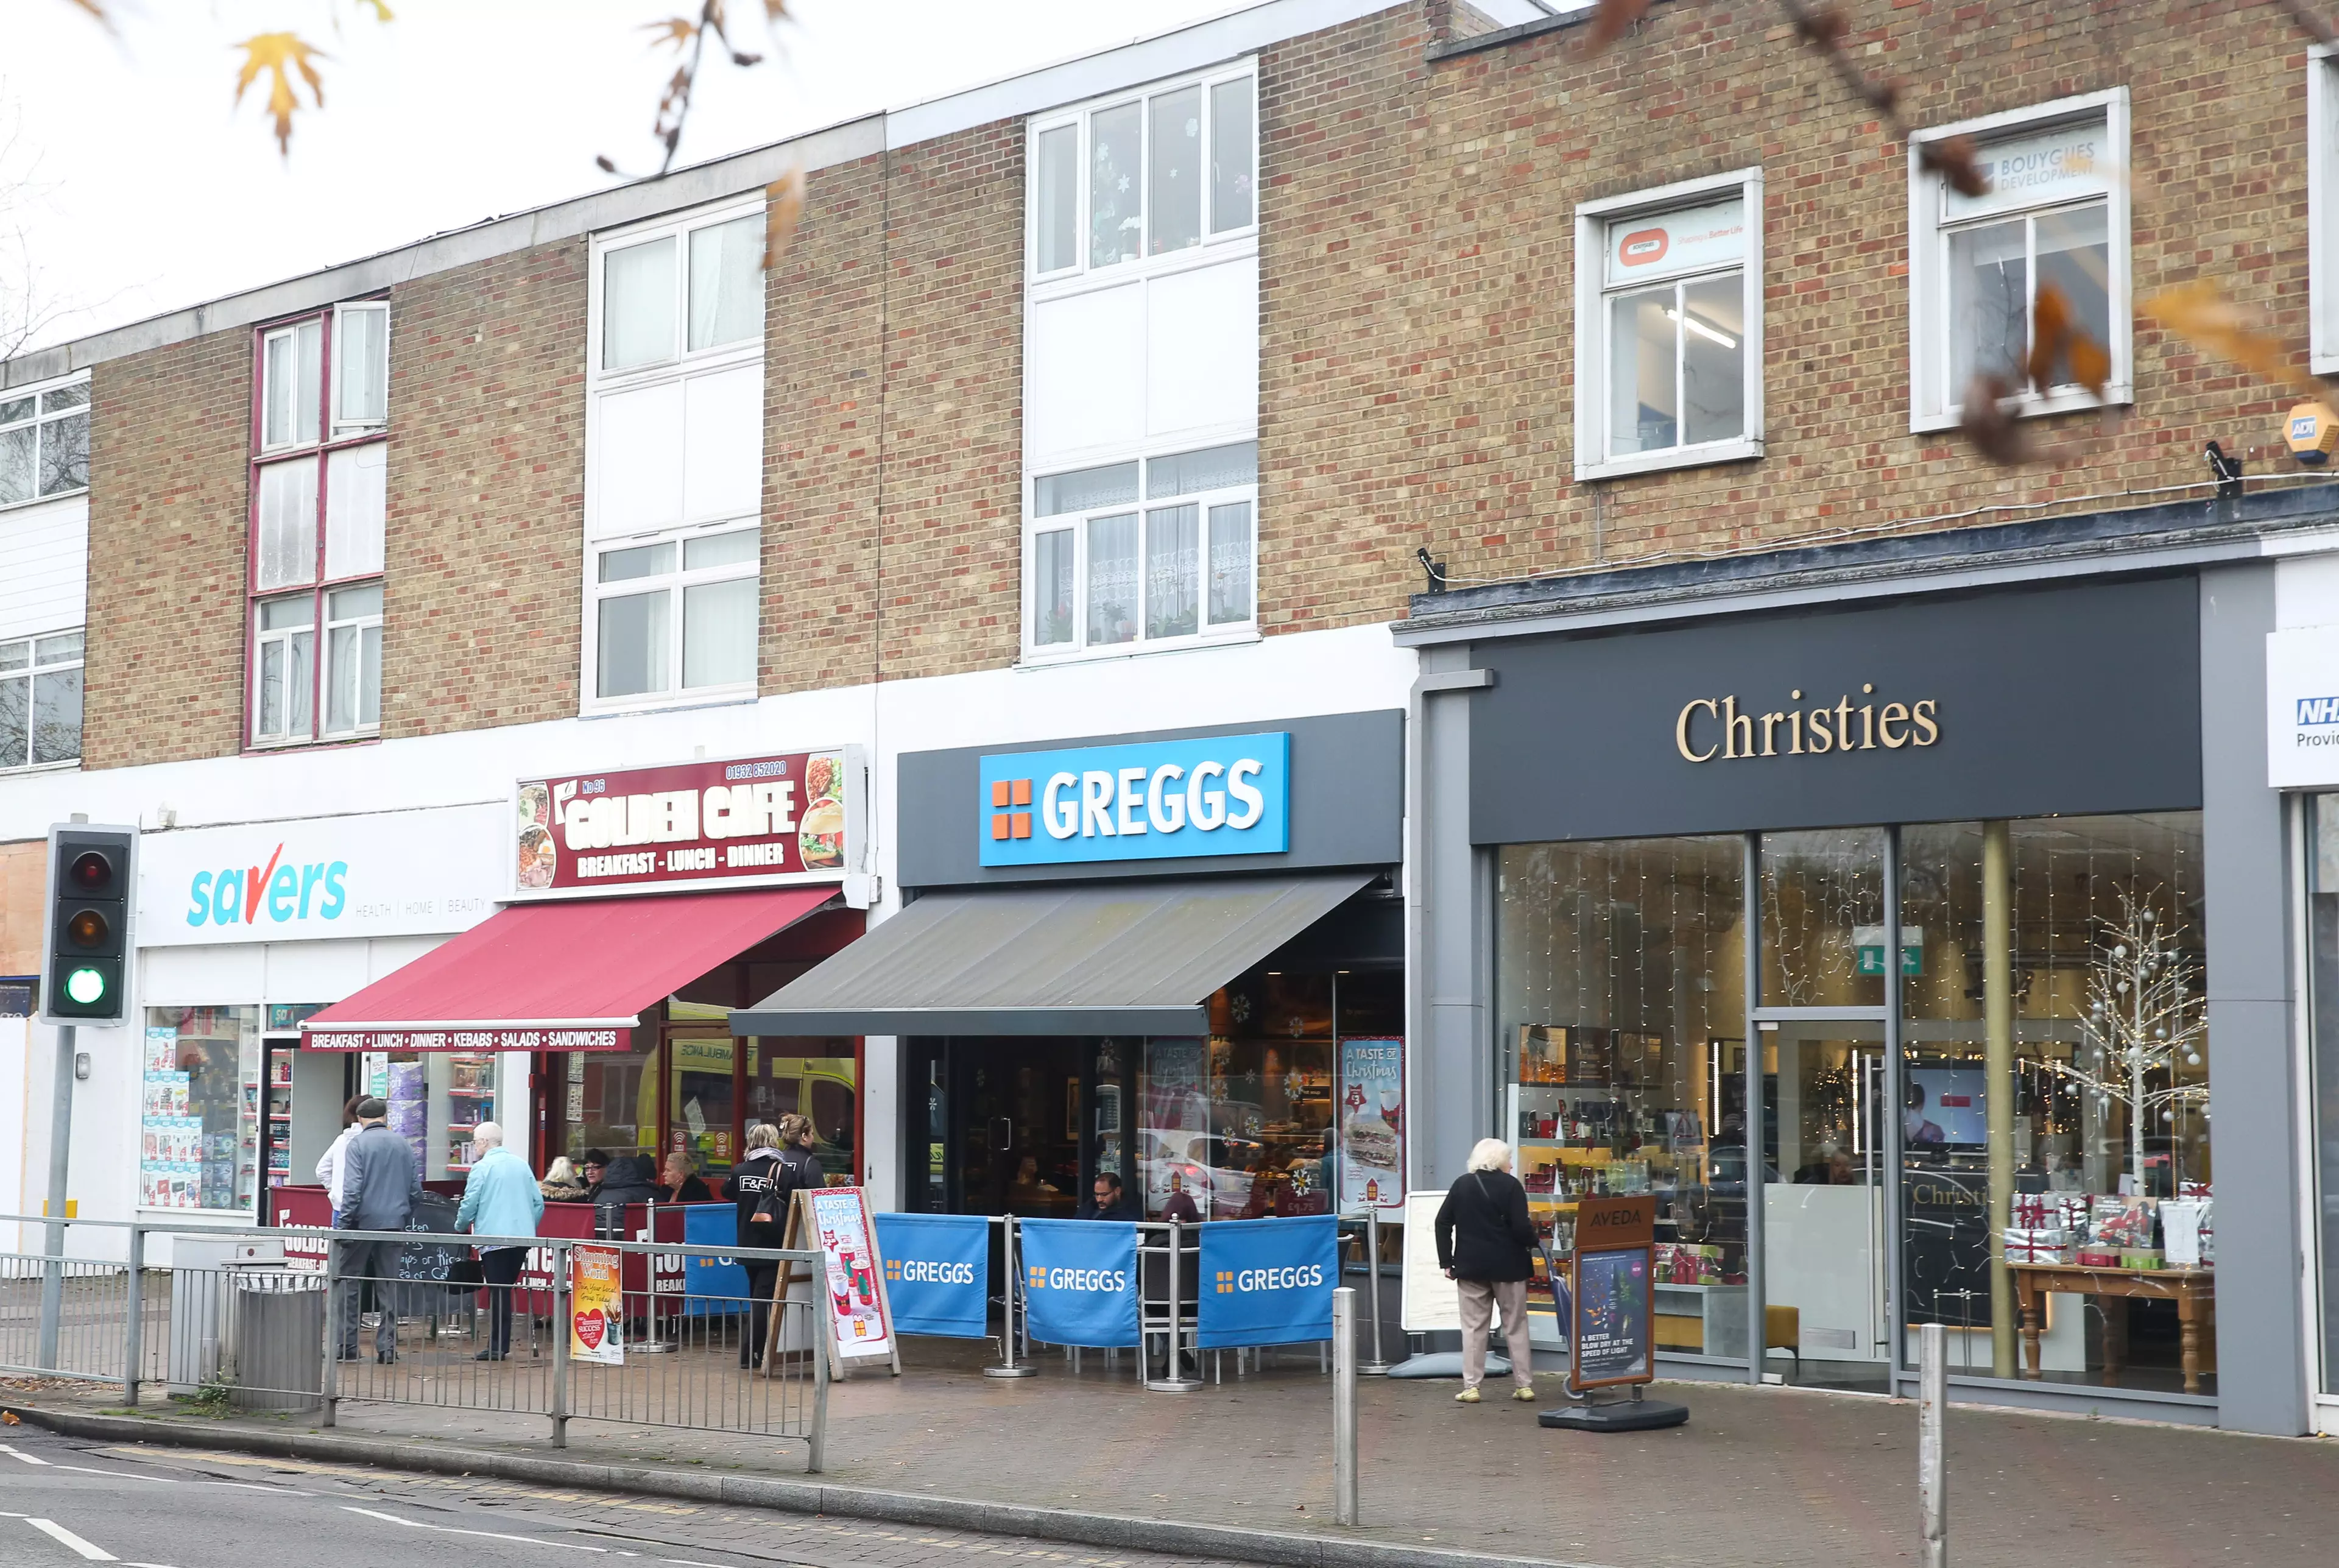 The traditional high street Greggs shop.